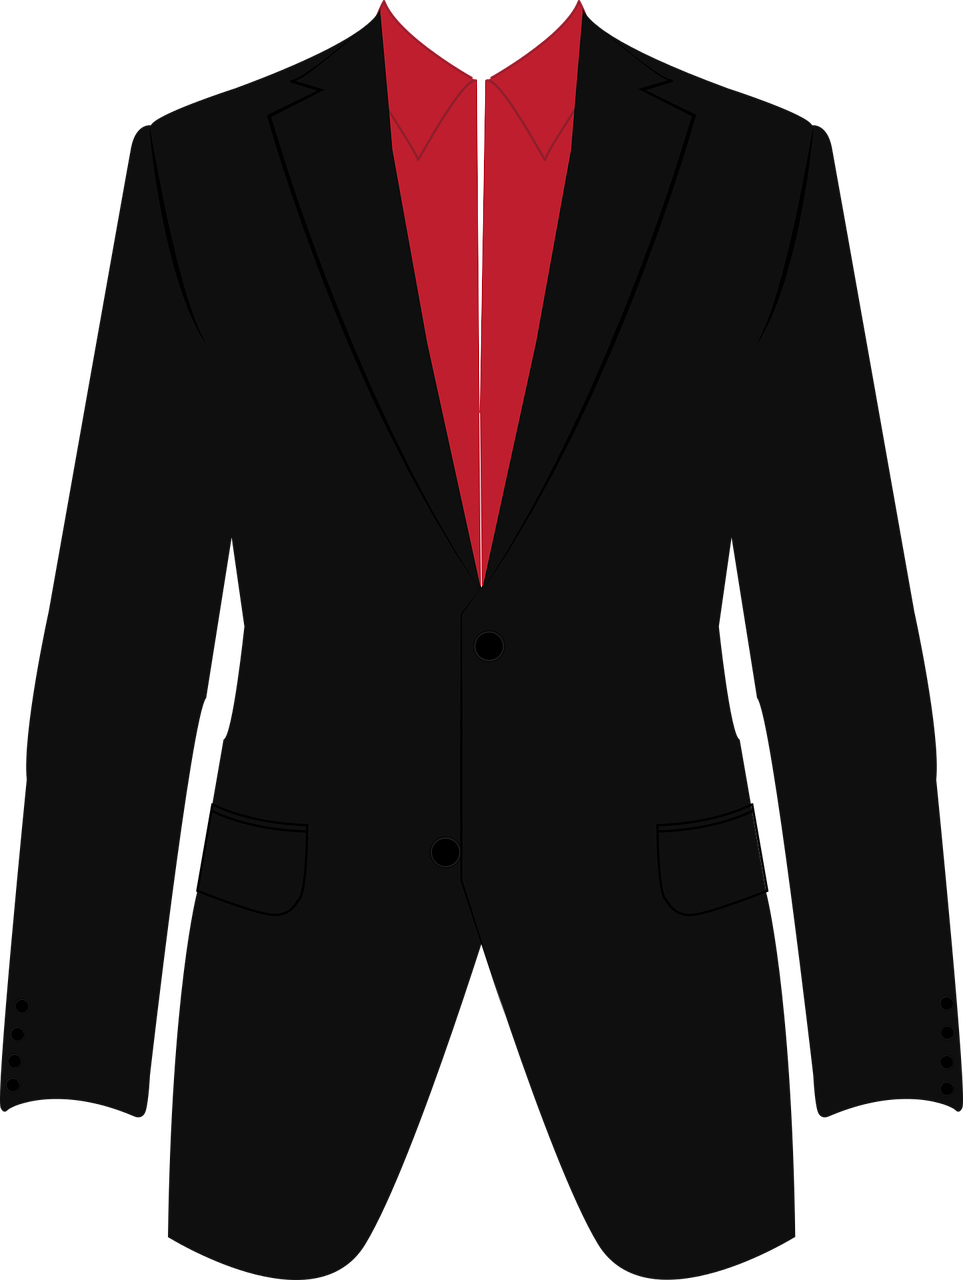 suit business icon free photo